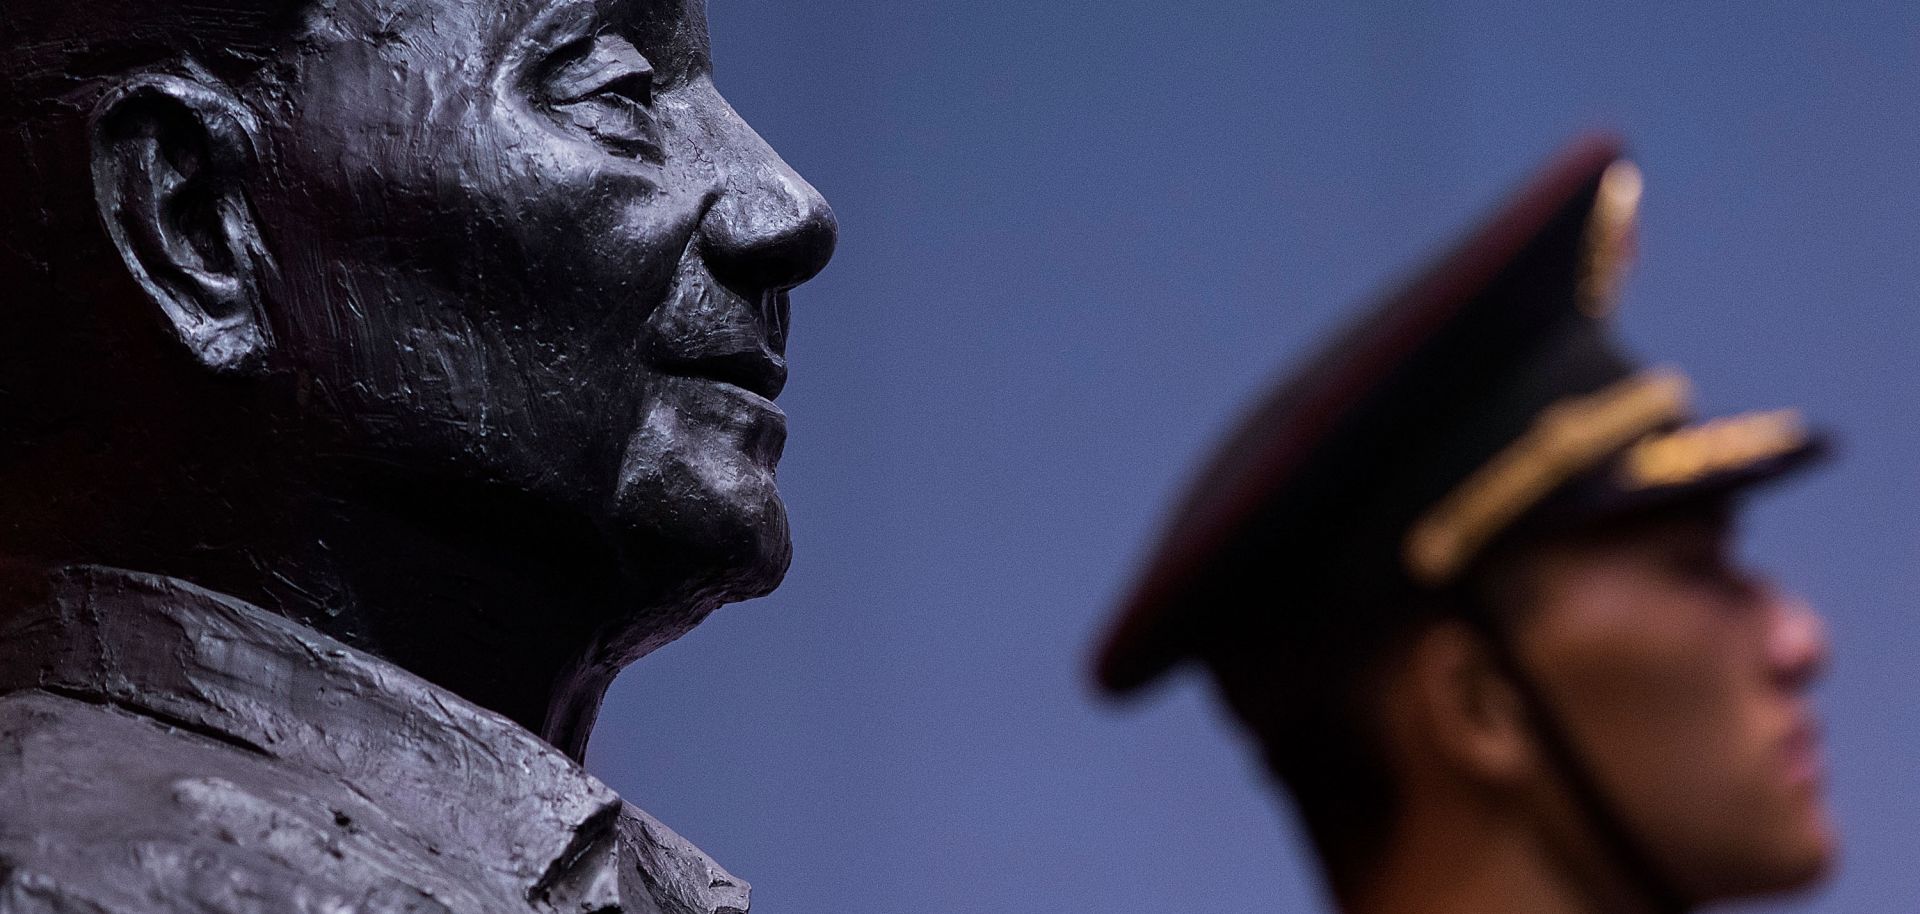 A bust of former Chinese leader Deng Xiaoping looks out at a member of China's People's Liberation Army.